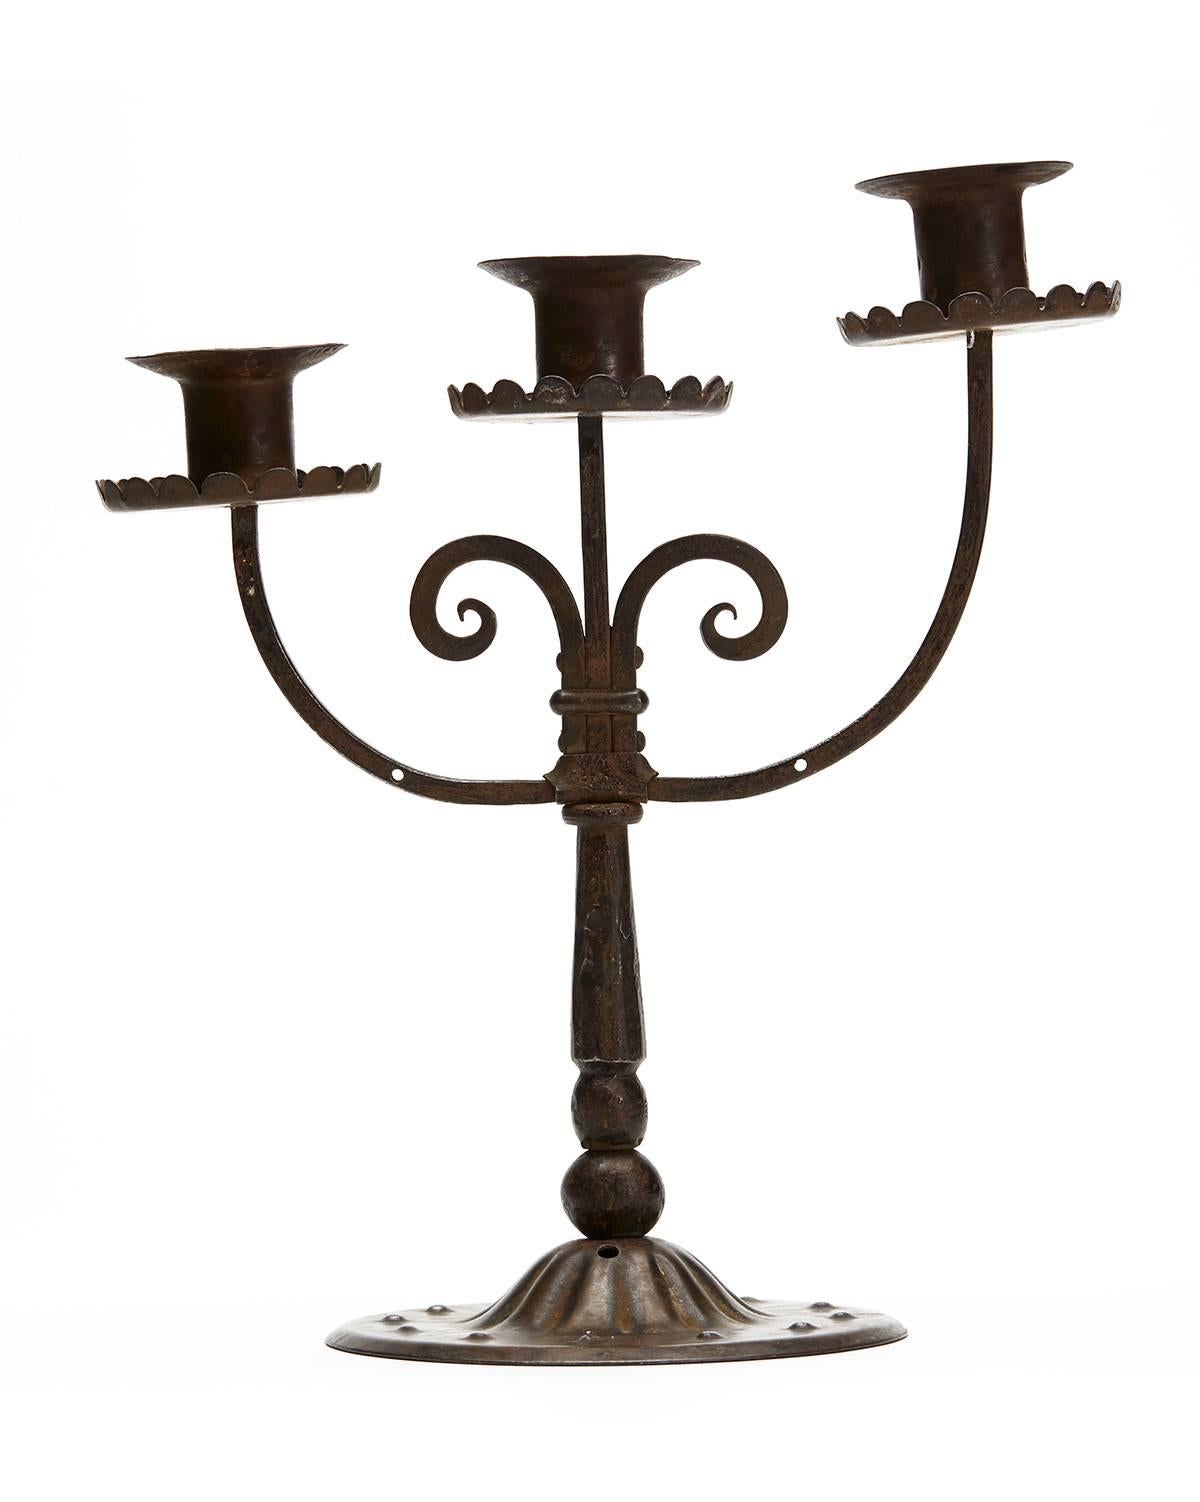 A stylish Austrian secessionist Industrial art patinated steel triple candlestick by Hugo bergere. The candlestick stands on a wide rounded foot with box steel arms with the three candleholders at graduated levels. The outer stems are drilled to